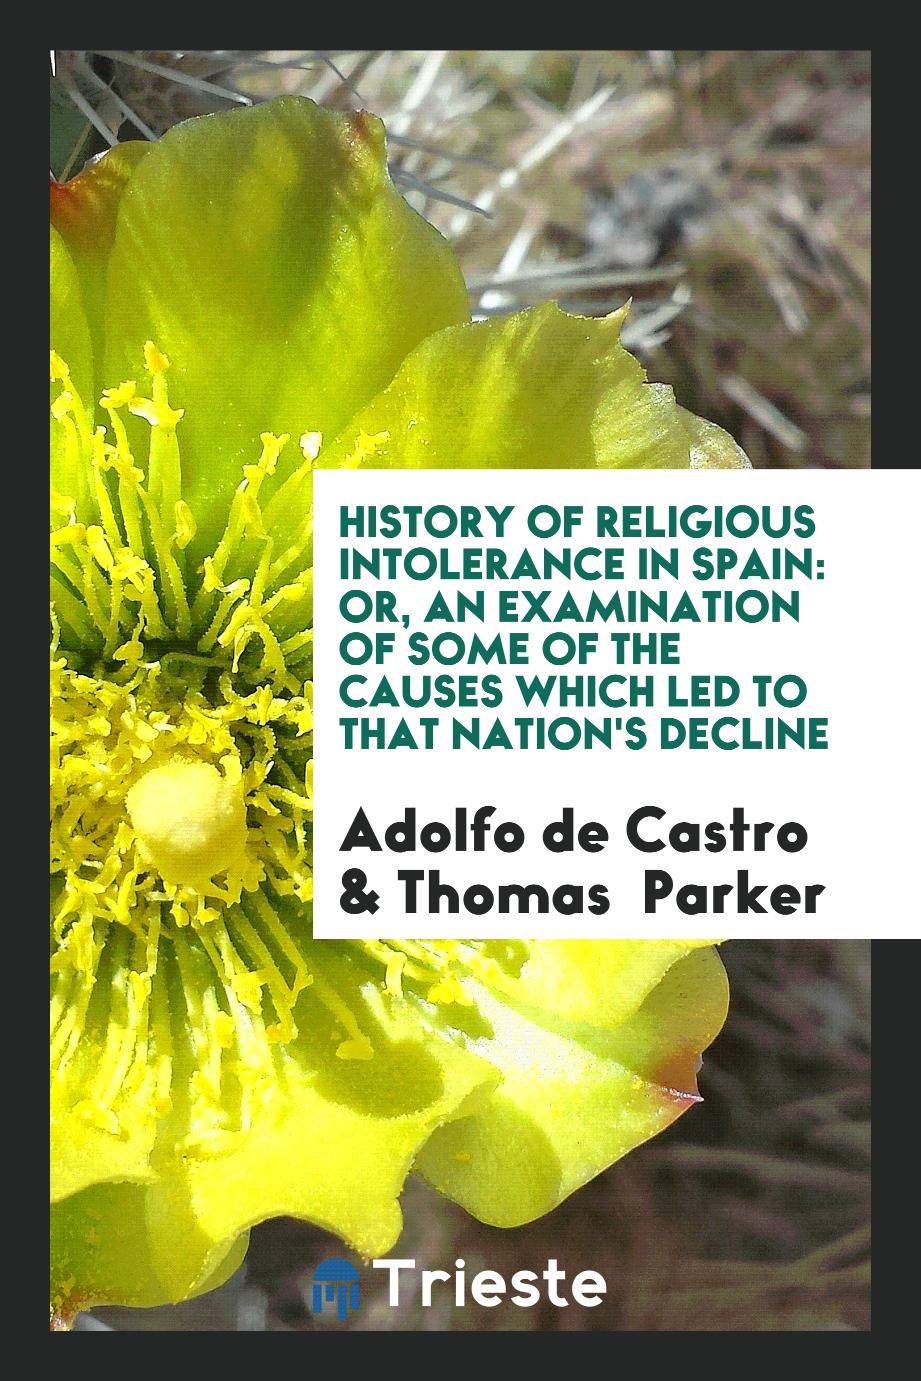 History of Religious Intolerance in Spain: Or, an Examination of Some of the Causes Which Led to That Nation's Decline